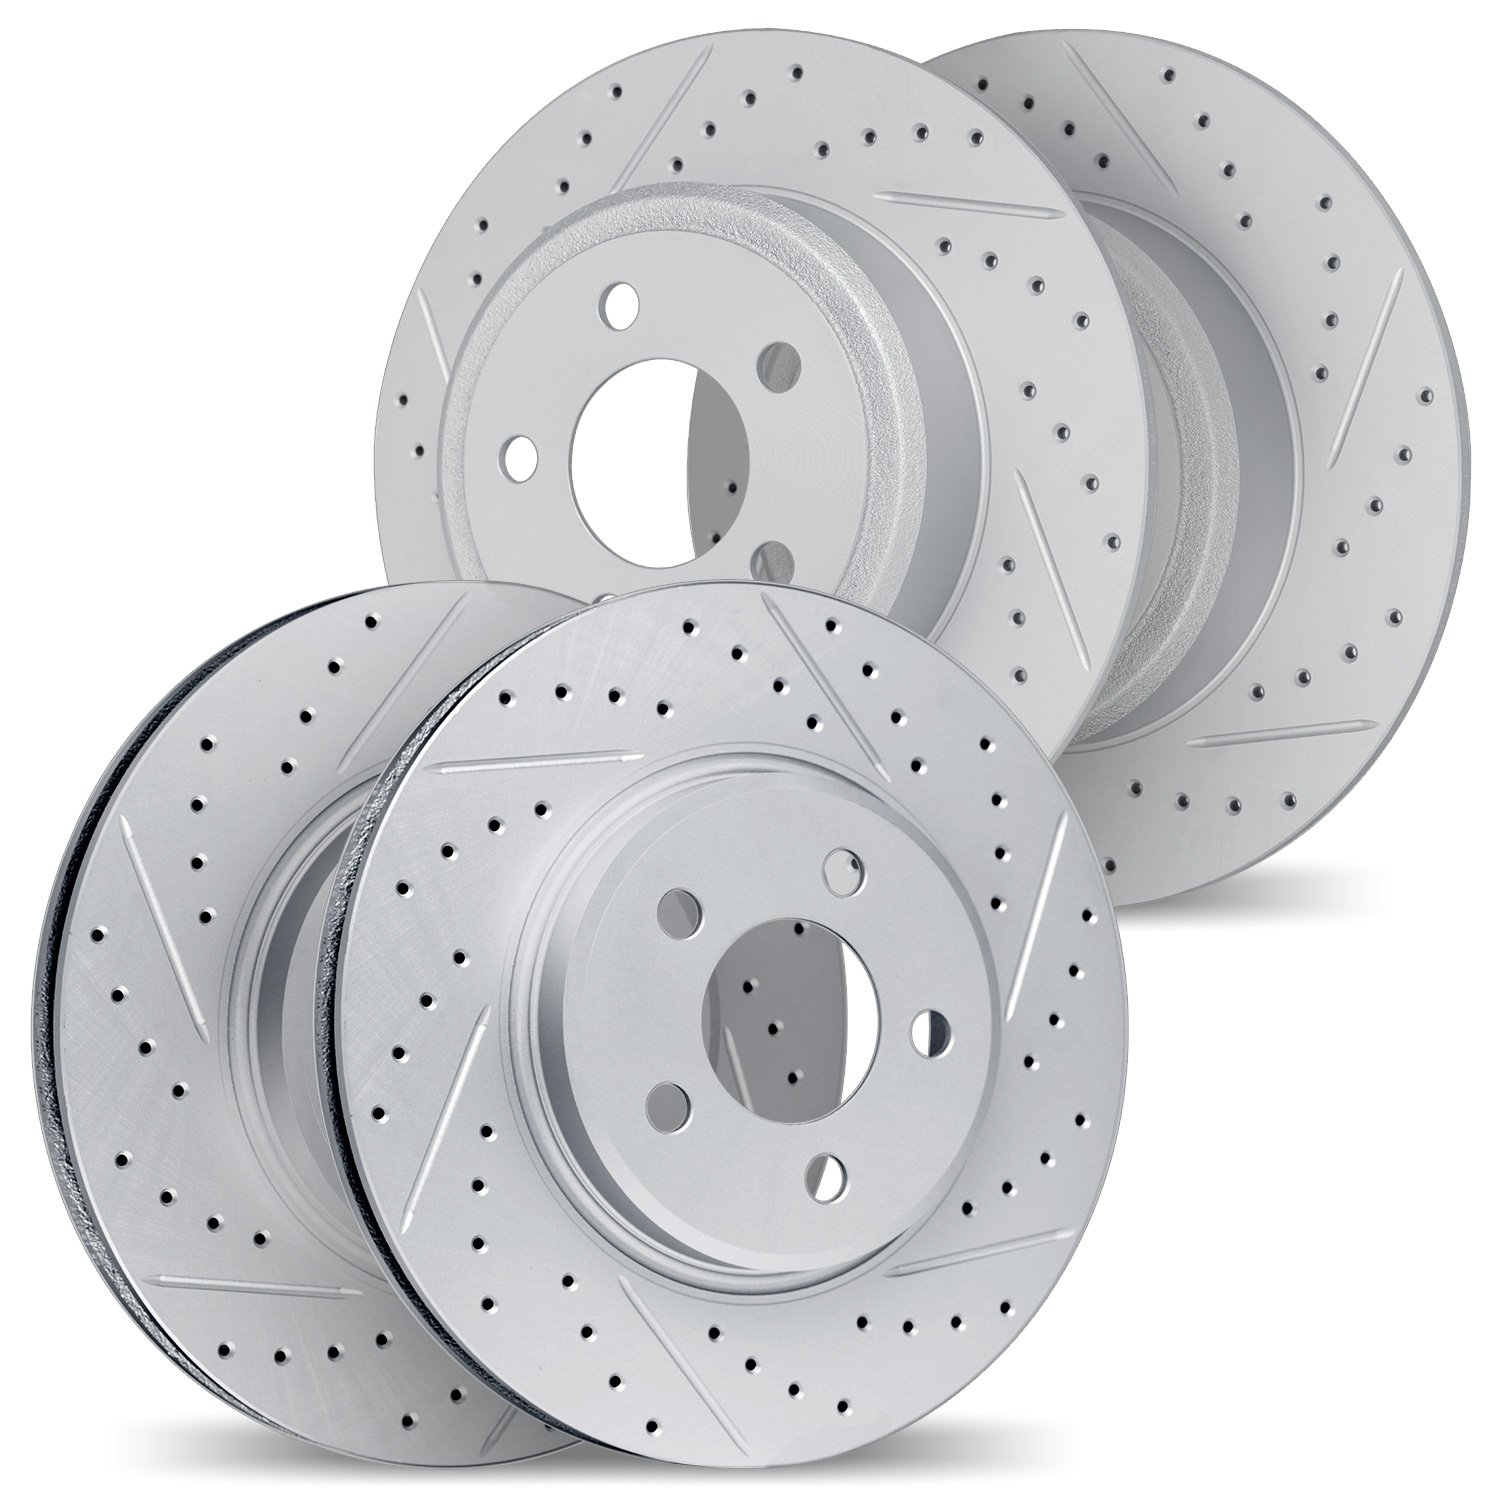 2004-32007 Geoperformance Drilled/Slotted Brake Rotors, Fits Select Mini, Position: Front and Rear